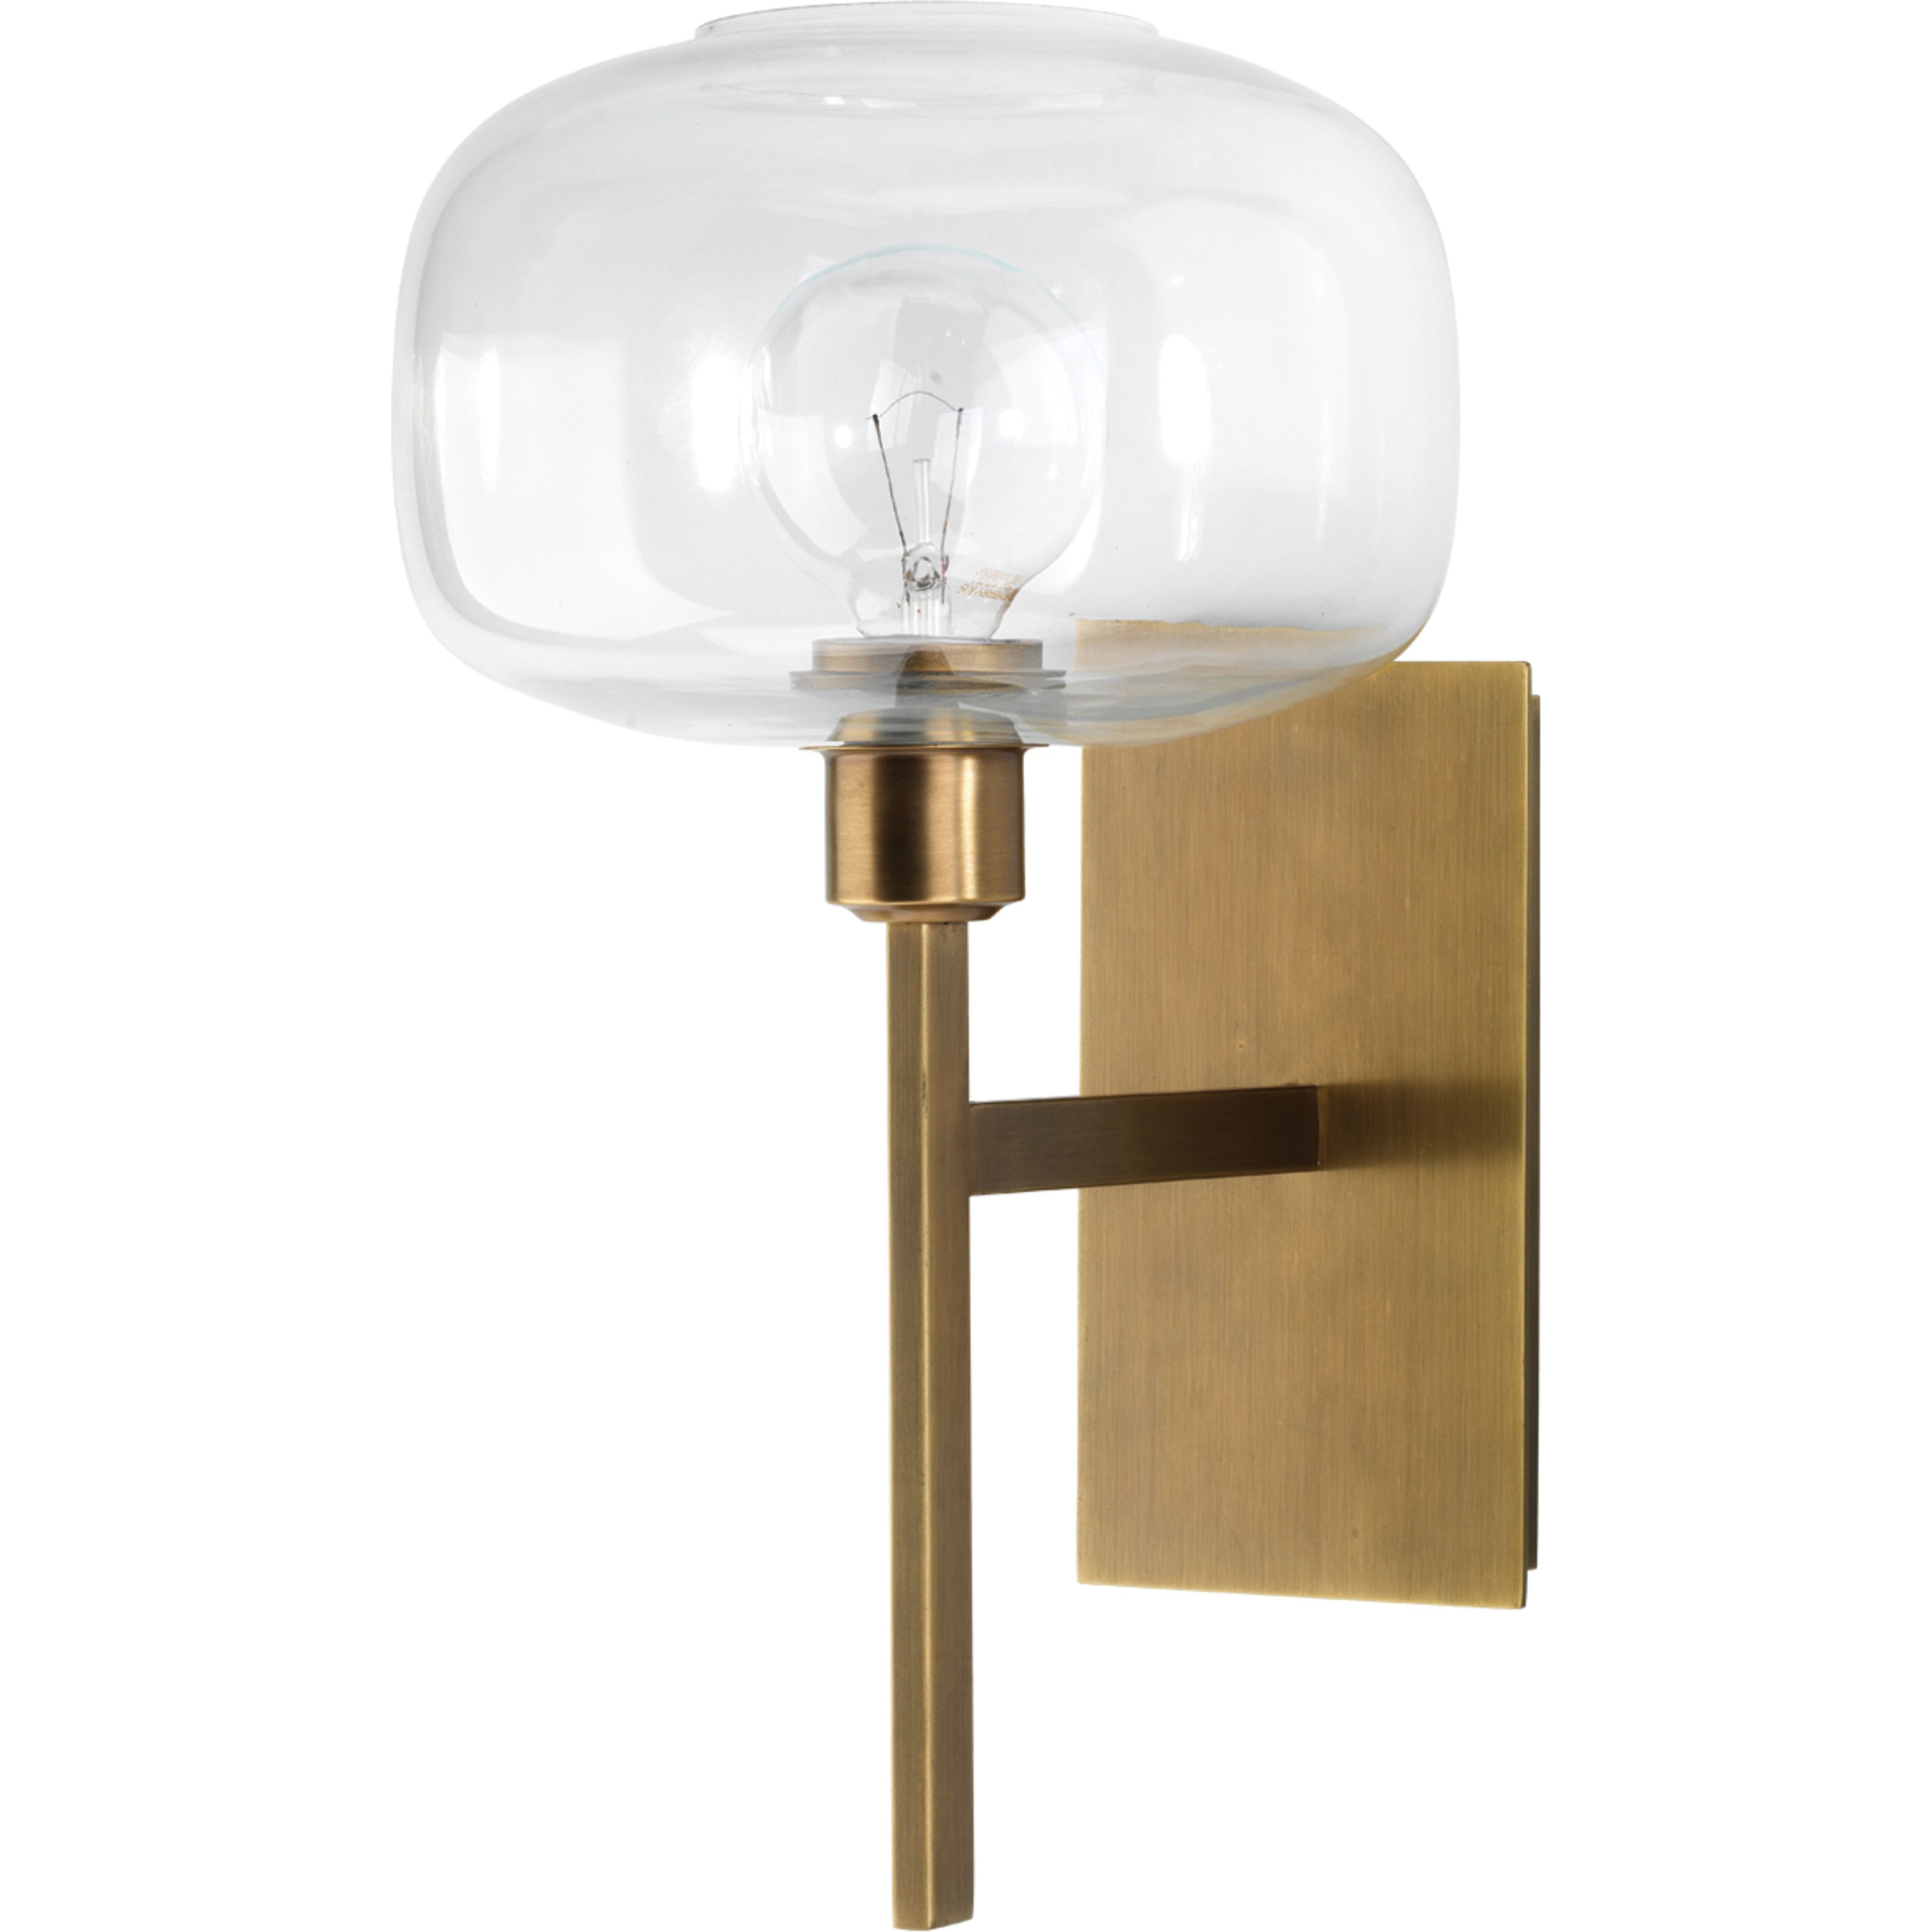 Jamie Young Company - 4SCAN-SCAB - Scando Mod Sconce - Scando - Antique Brass, Clear Glass